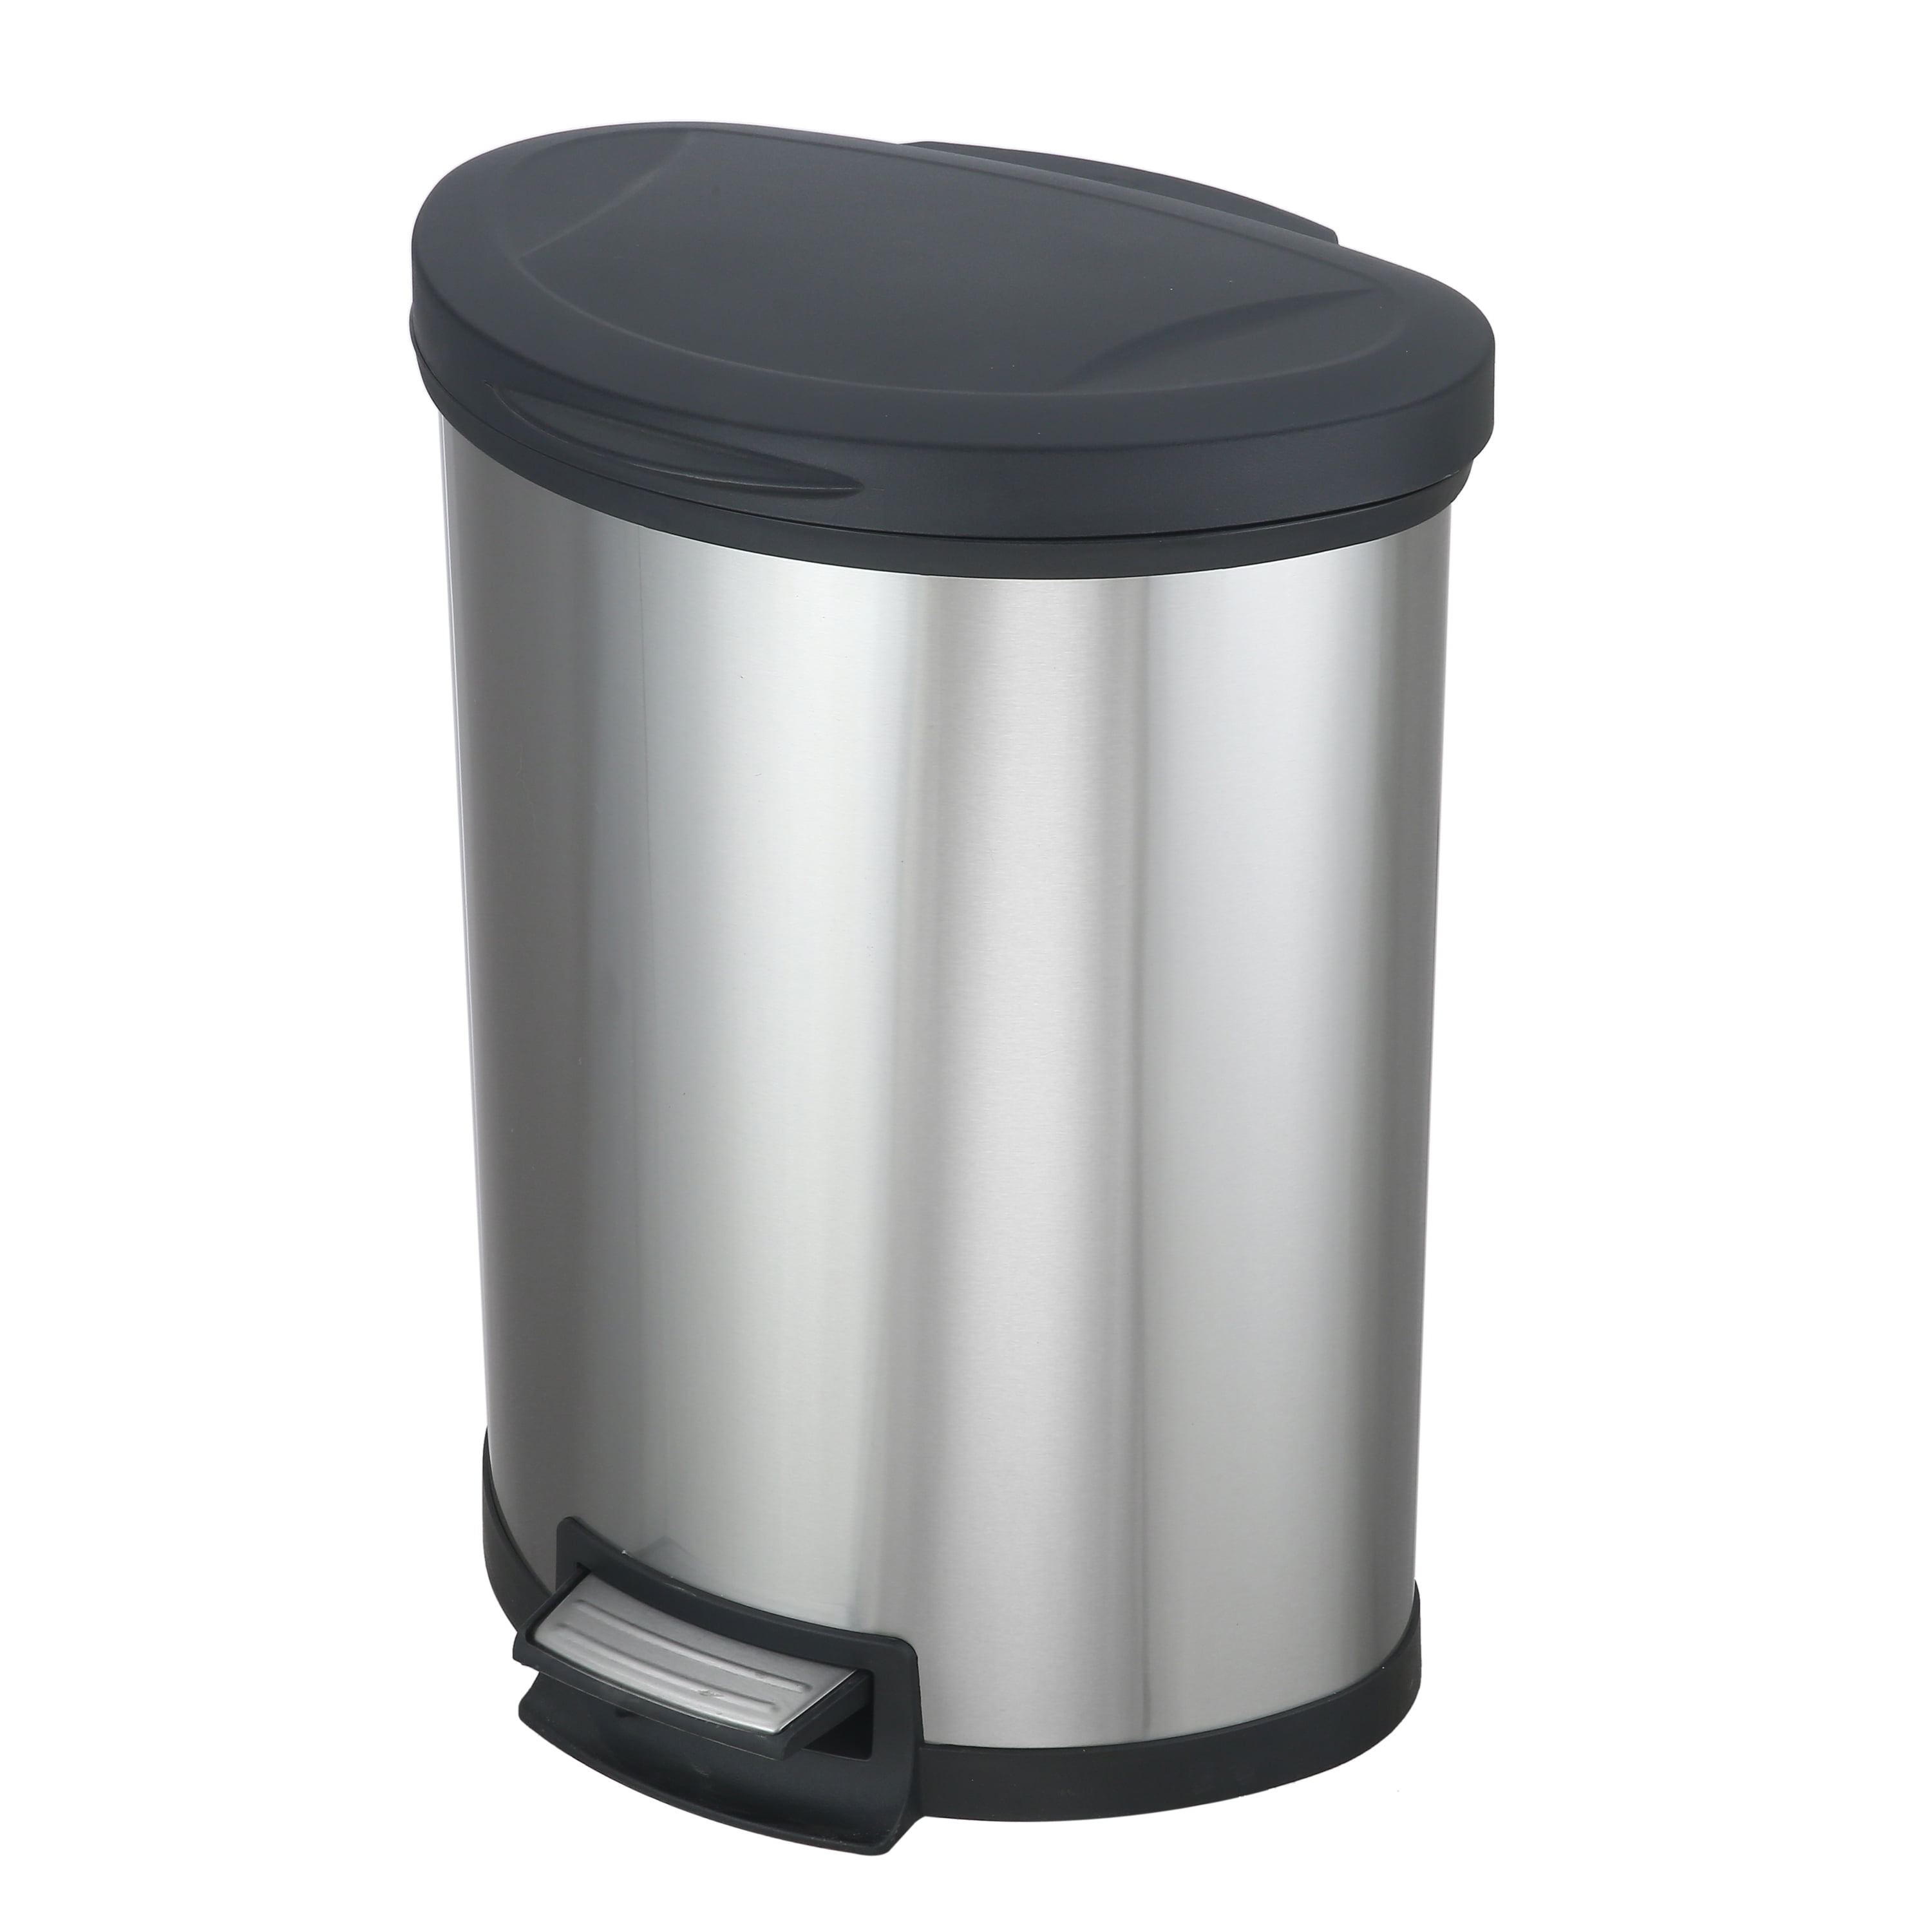 Mainstays 14.2 gal / 54L Semi Round Stainless Steel Kitchen Trash Can Stainless Steel Kitchen Trash Can Walmart